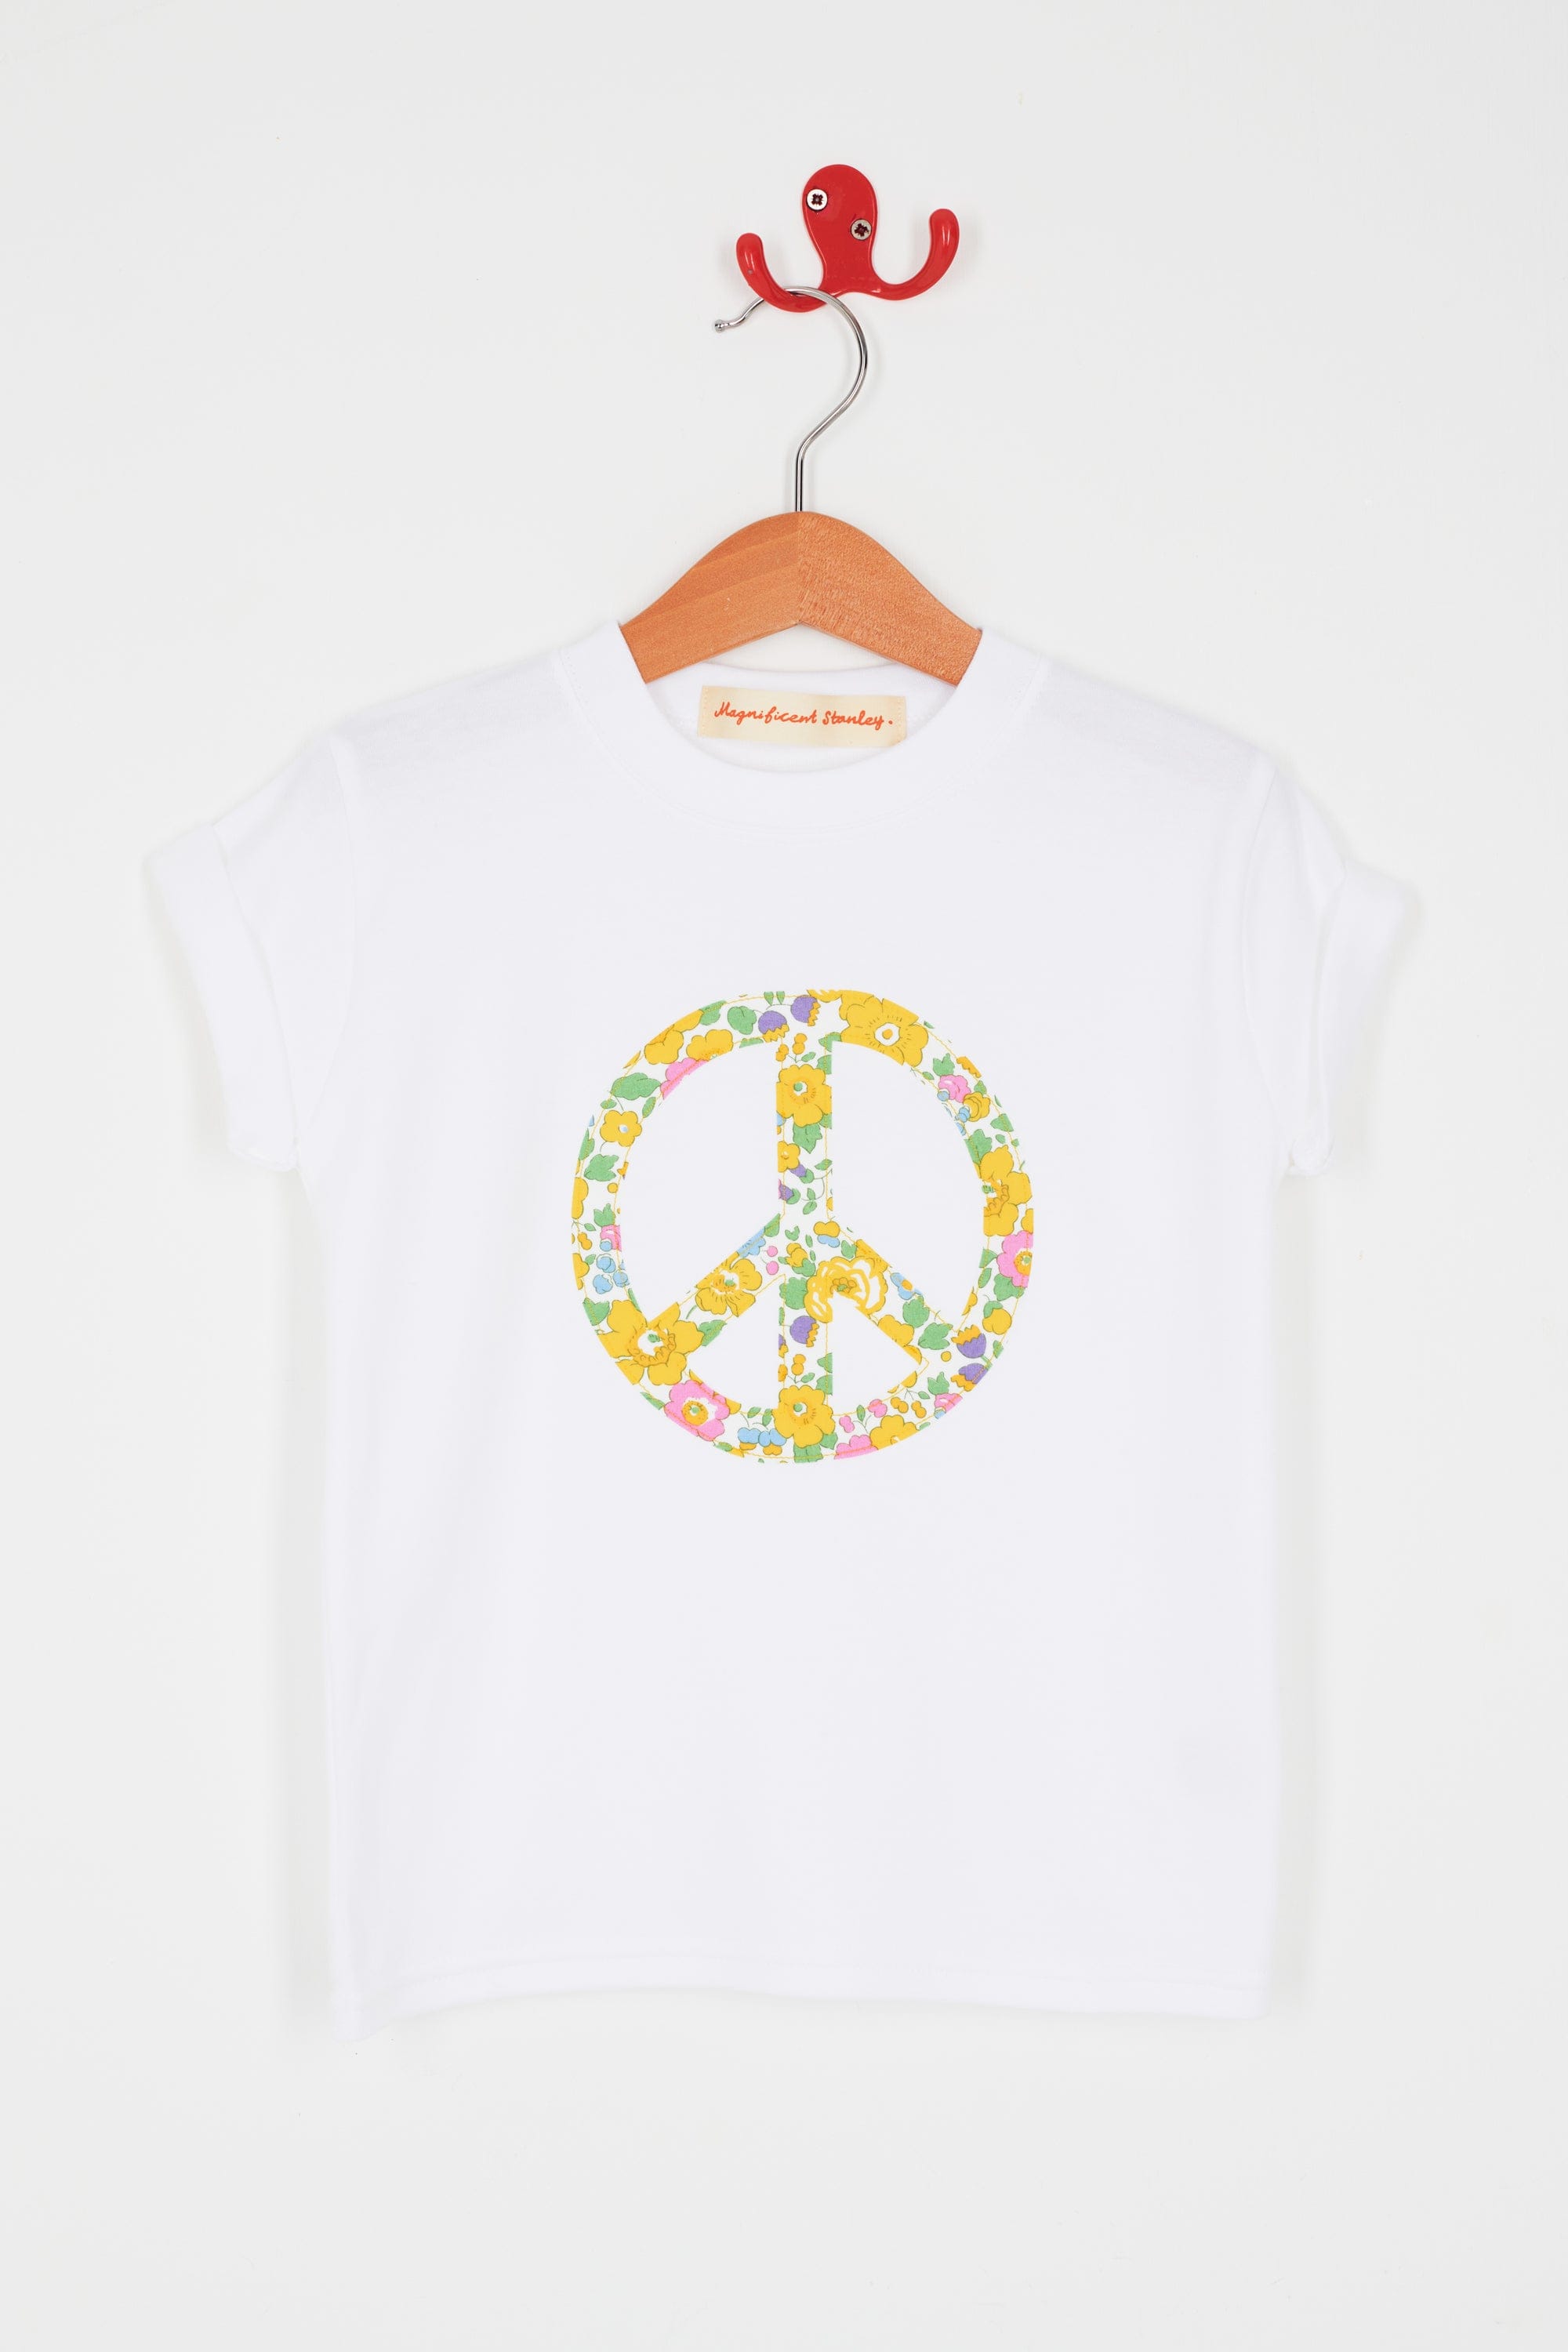 Magnificent Stanley Tee Peace T-Shirt in choice of Liberty Print